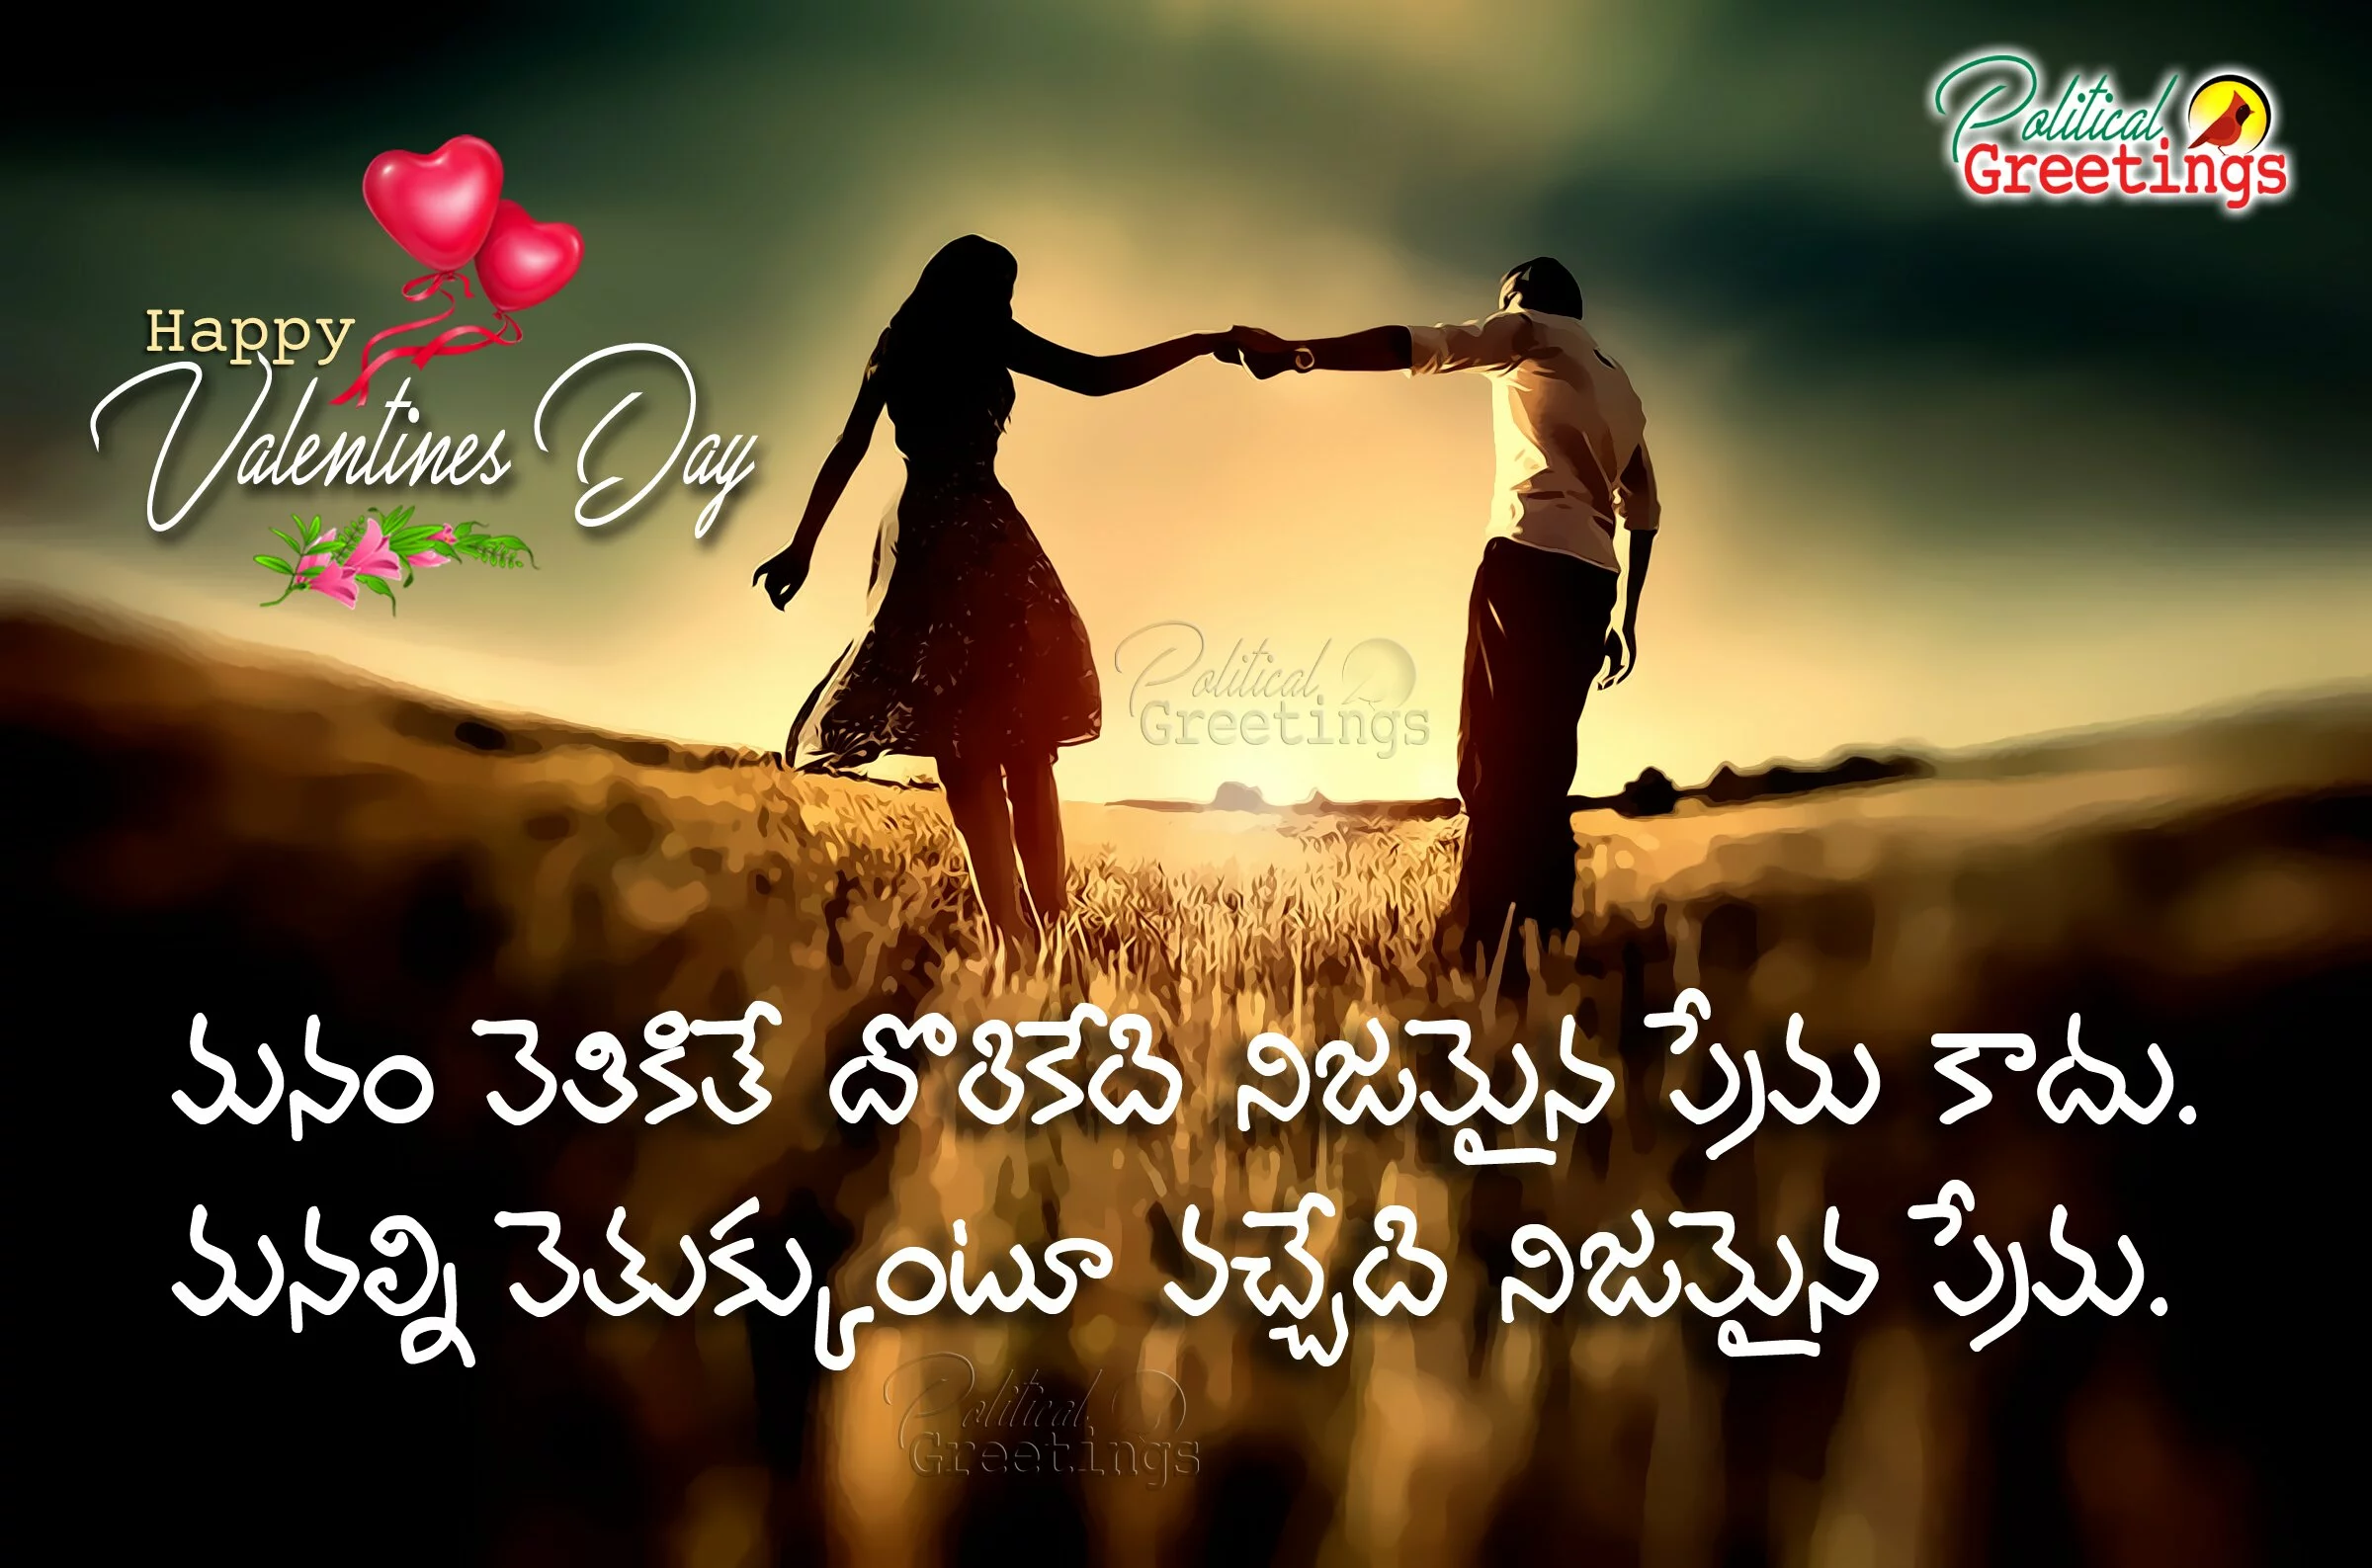 telugu-valentines-day-love-quotes-greetings